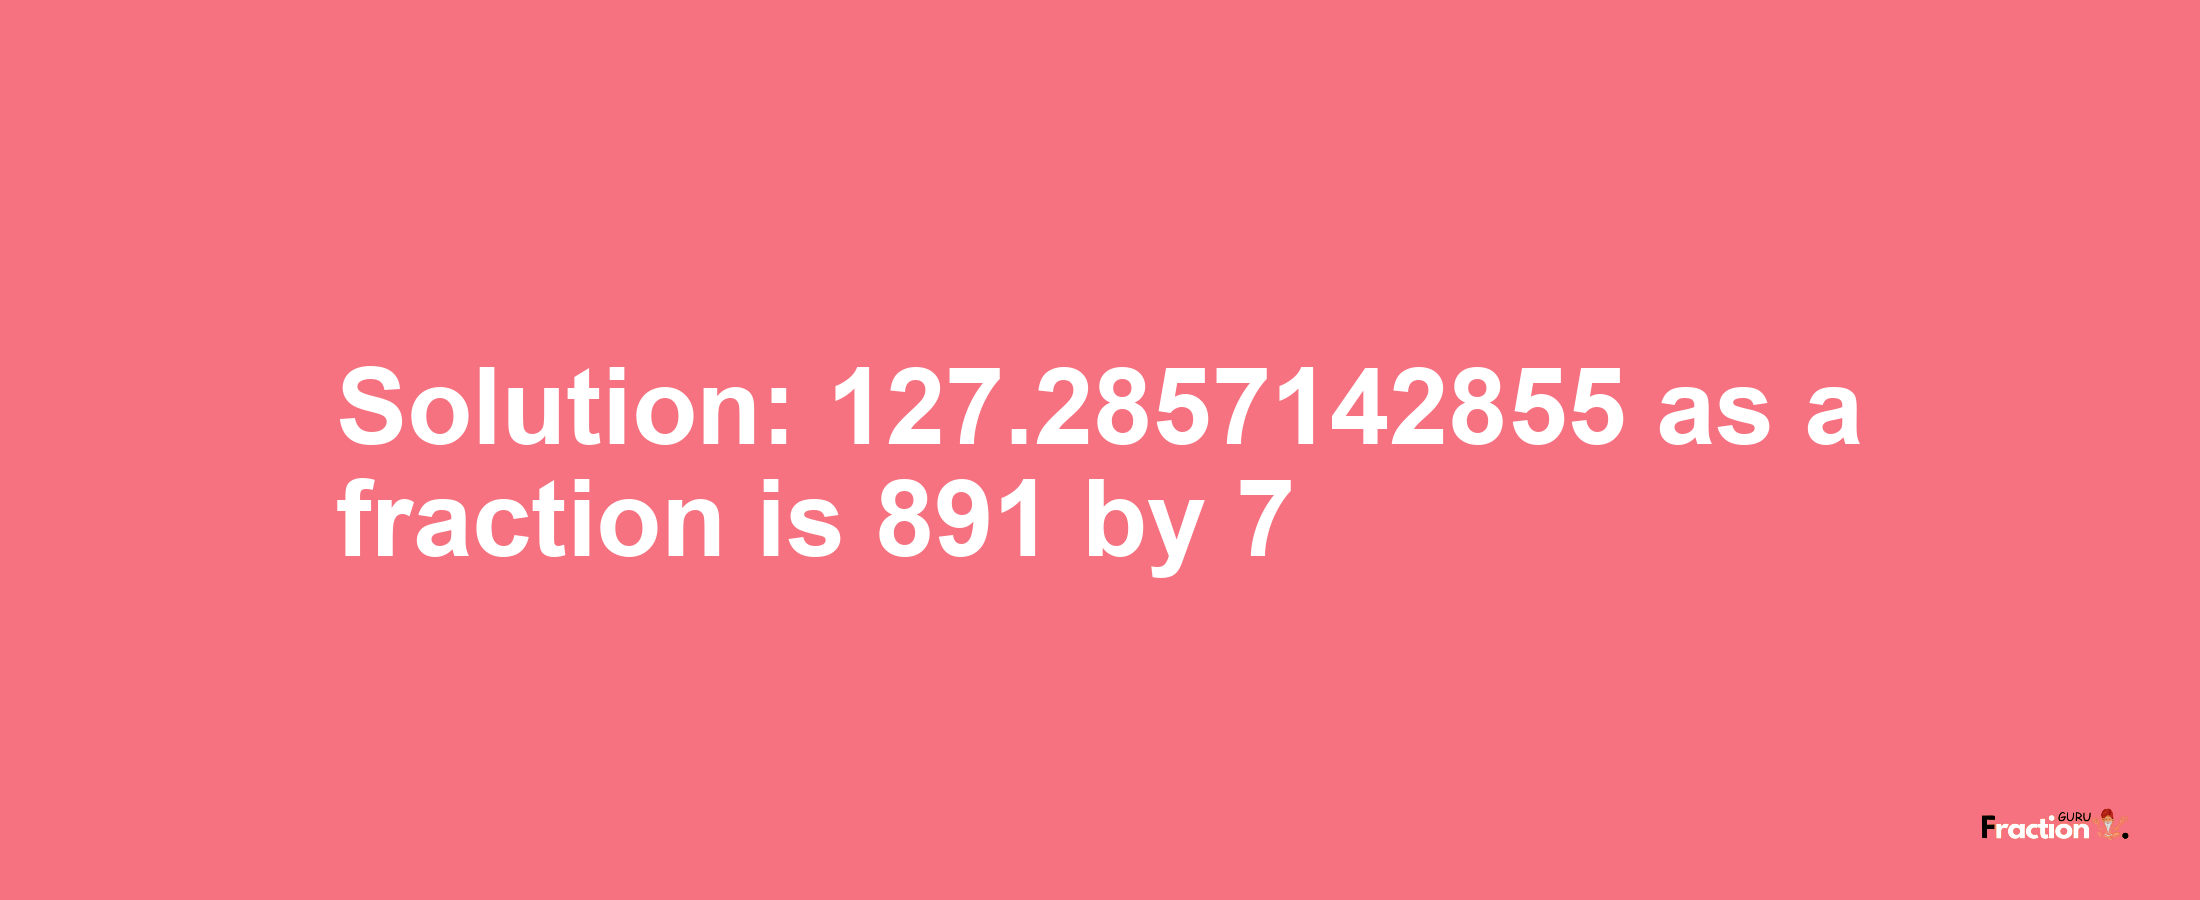 Solution:127.2857142855 as a fraction is 891/7